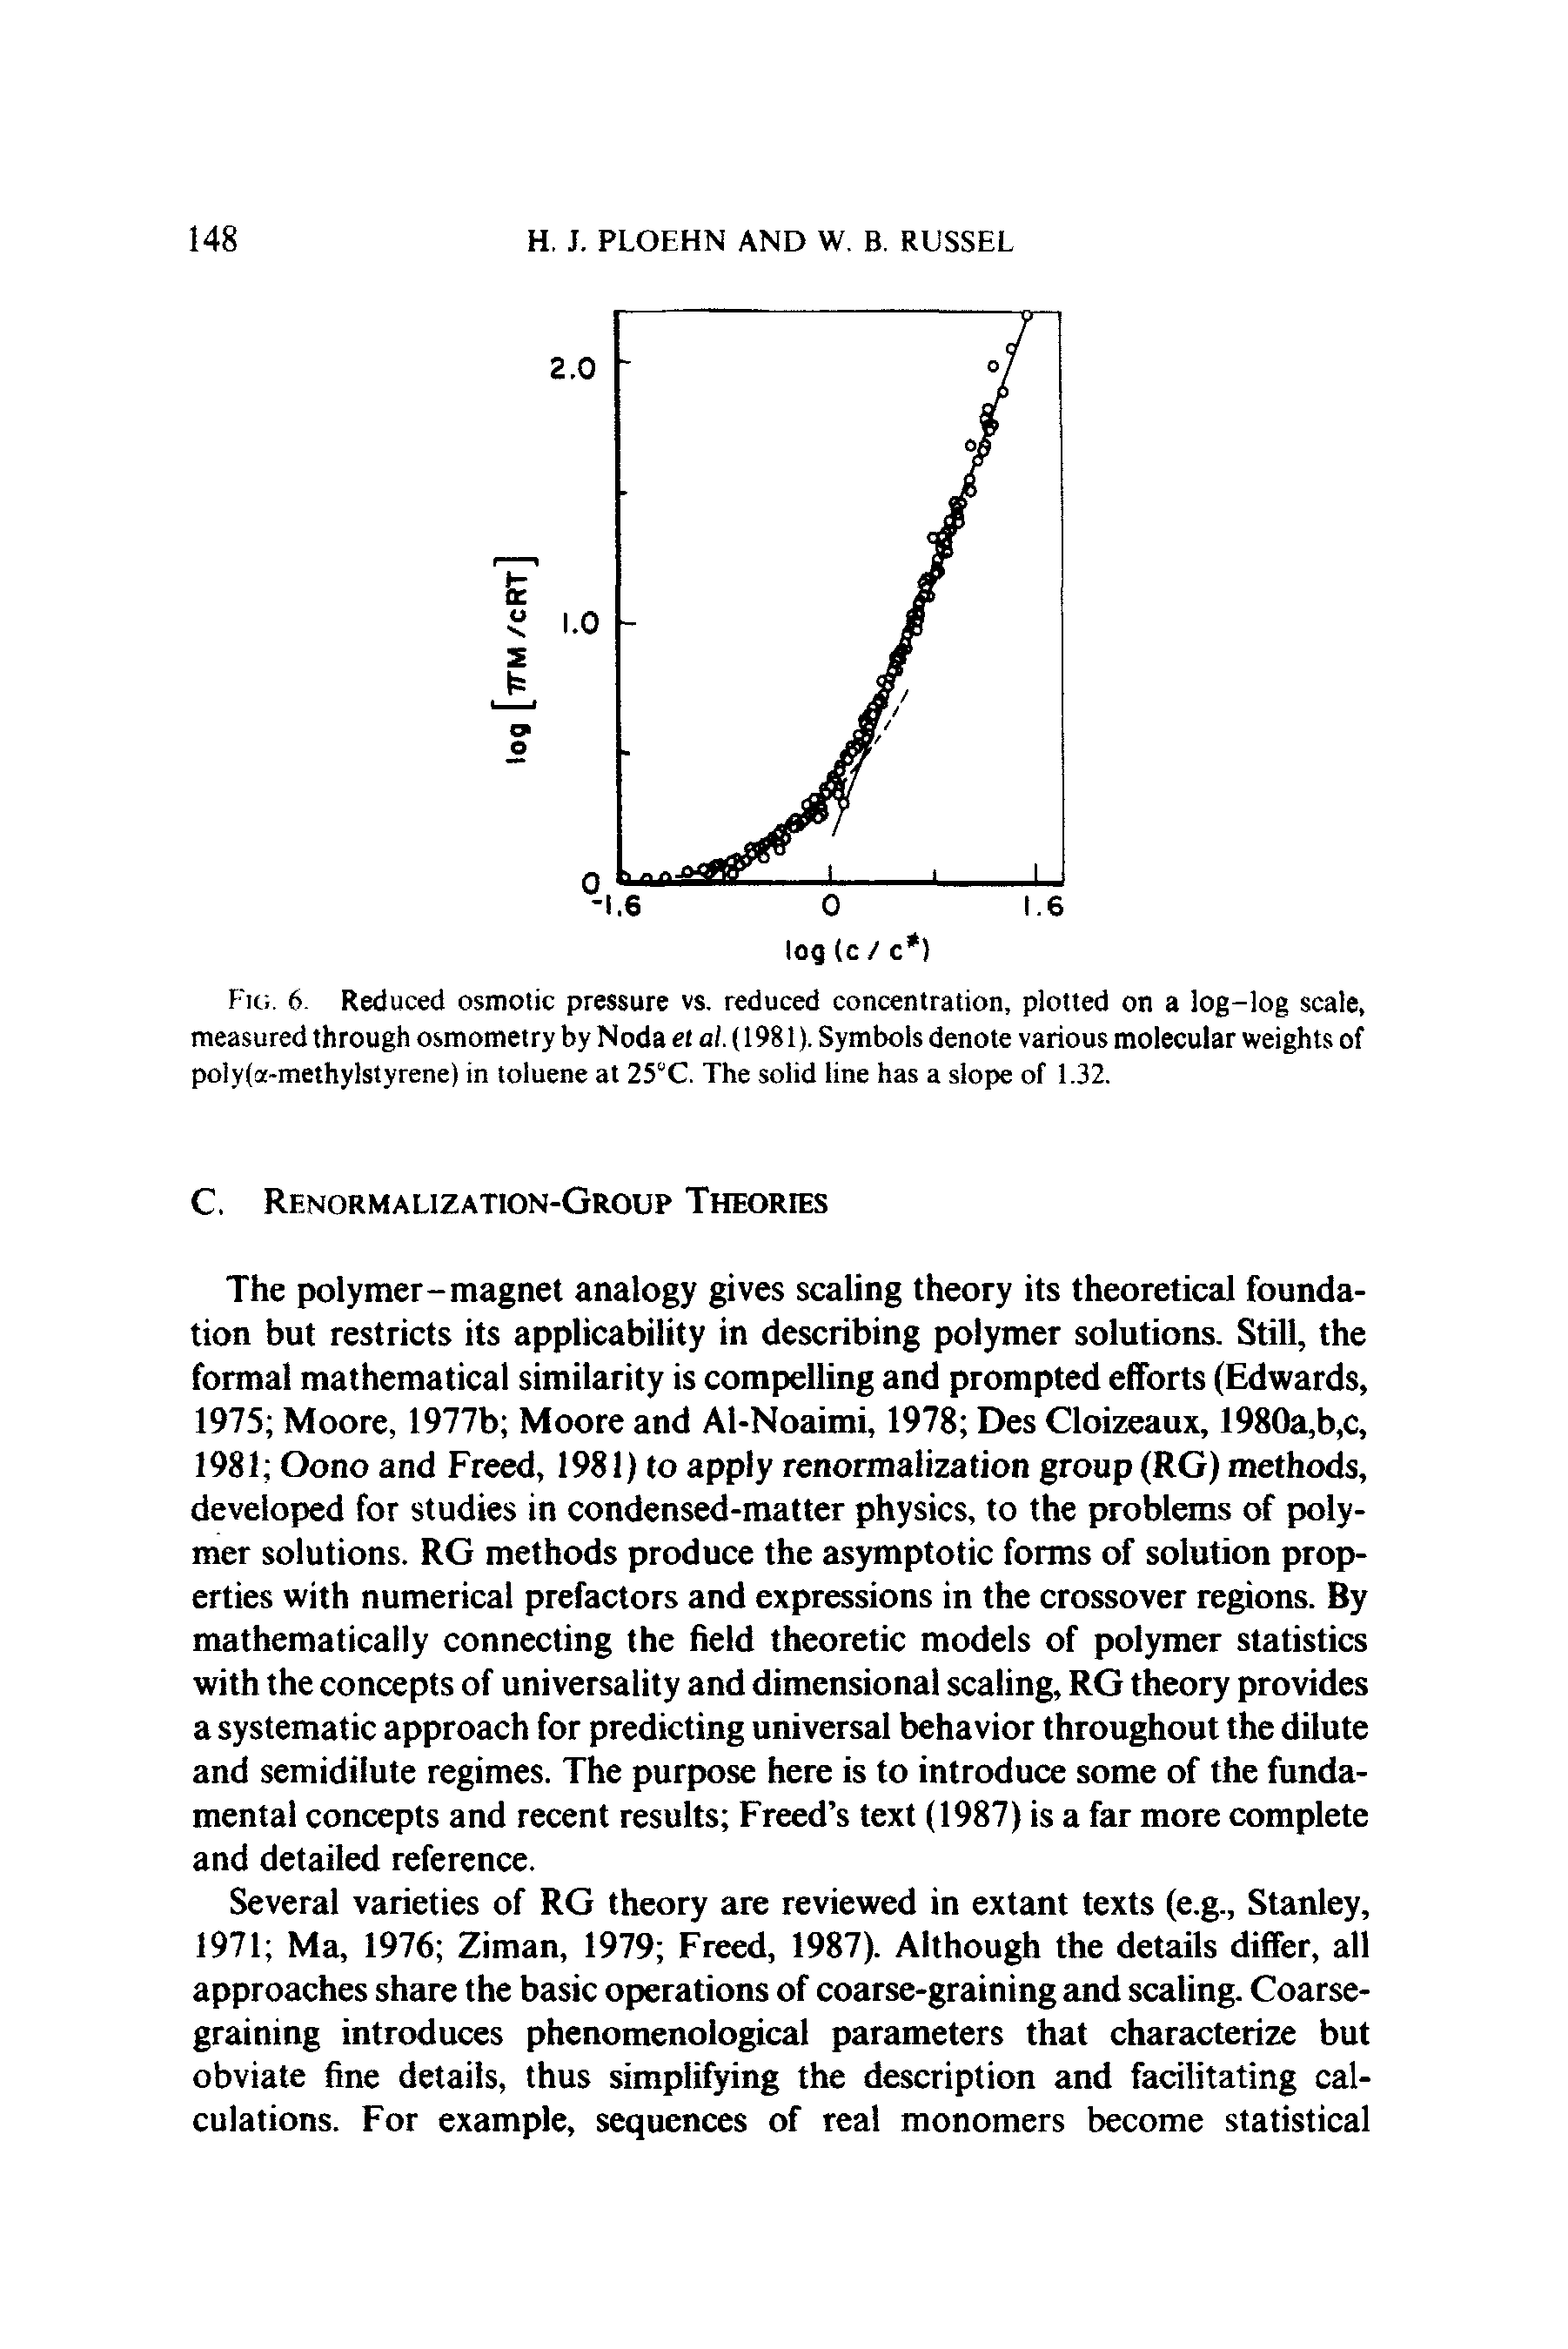 Fig. 6. Reduced osmotic pressure vs. reduced concentration, plotted on a log-log scale, measured through osmometry by Noda el al. (1981). Symbols denote various molecular weights of poly(a-methylstyrene) in toluene at 25 C. The solid line has a slope of 1.32.